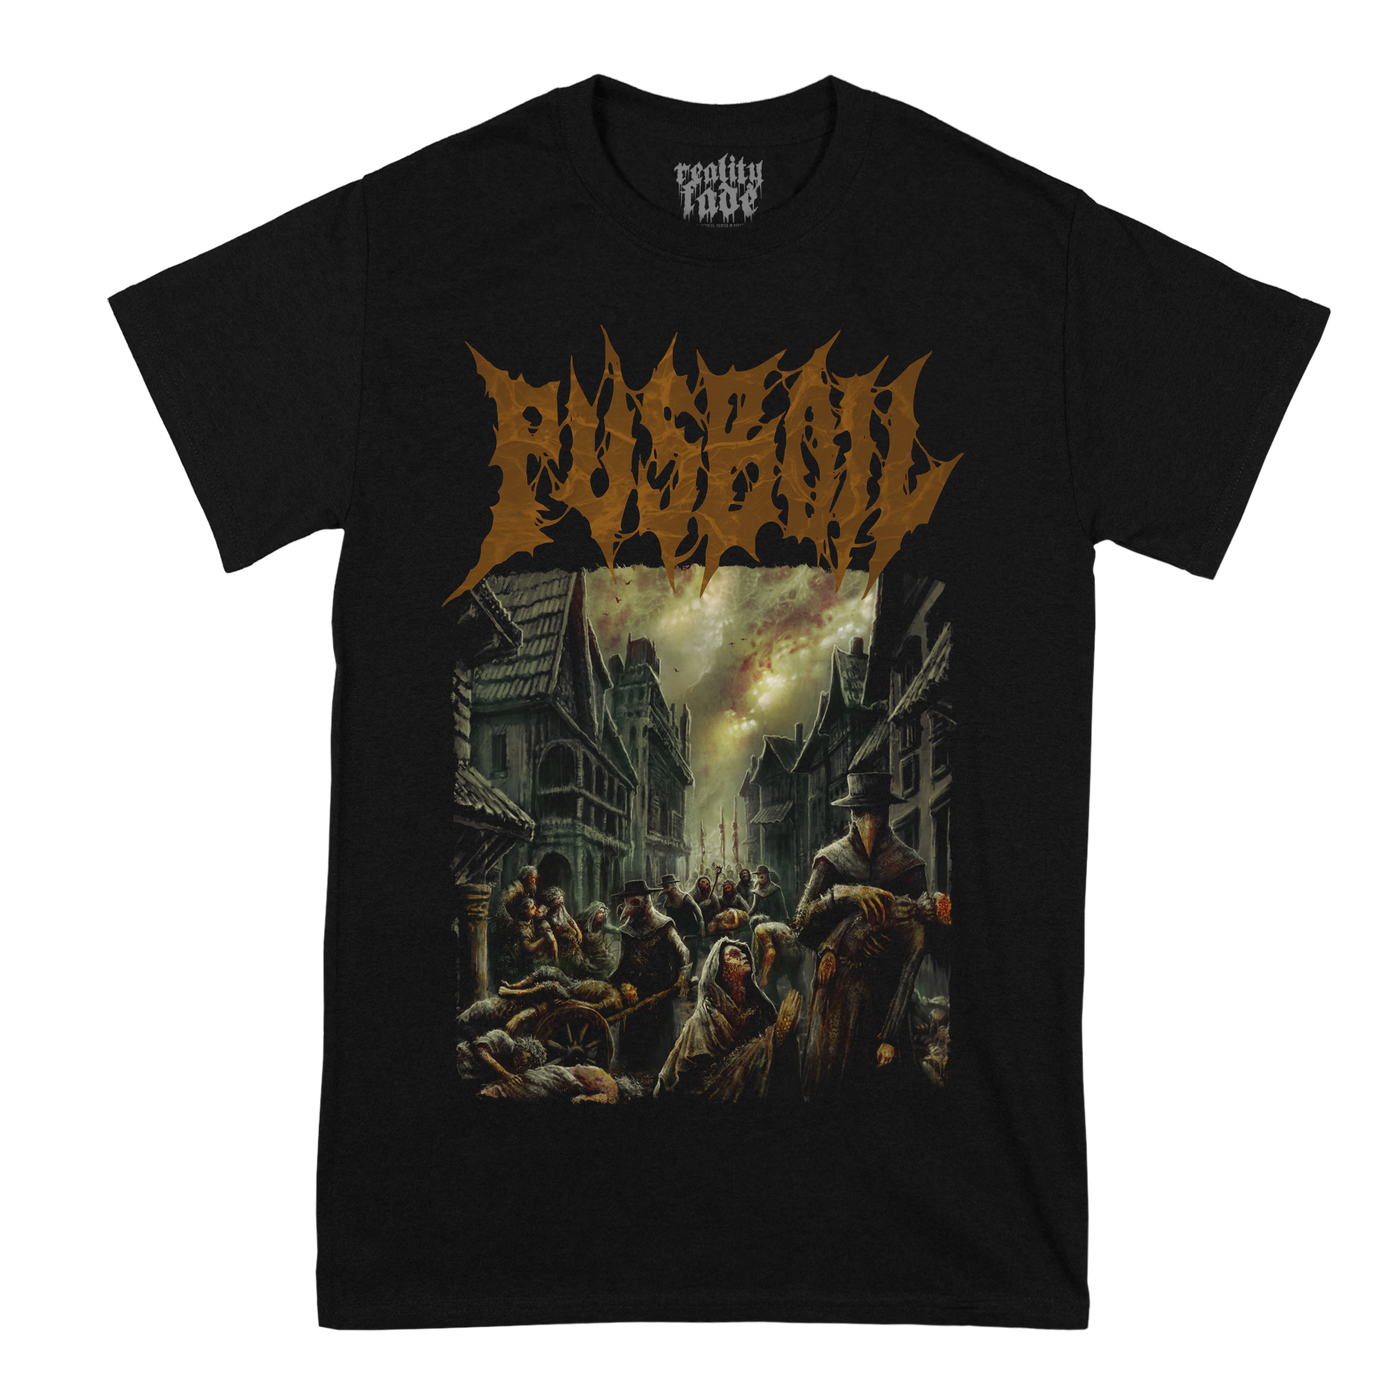 Pusboil 'Ancient Stories of Suffering and Disease' T-Shirt